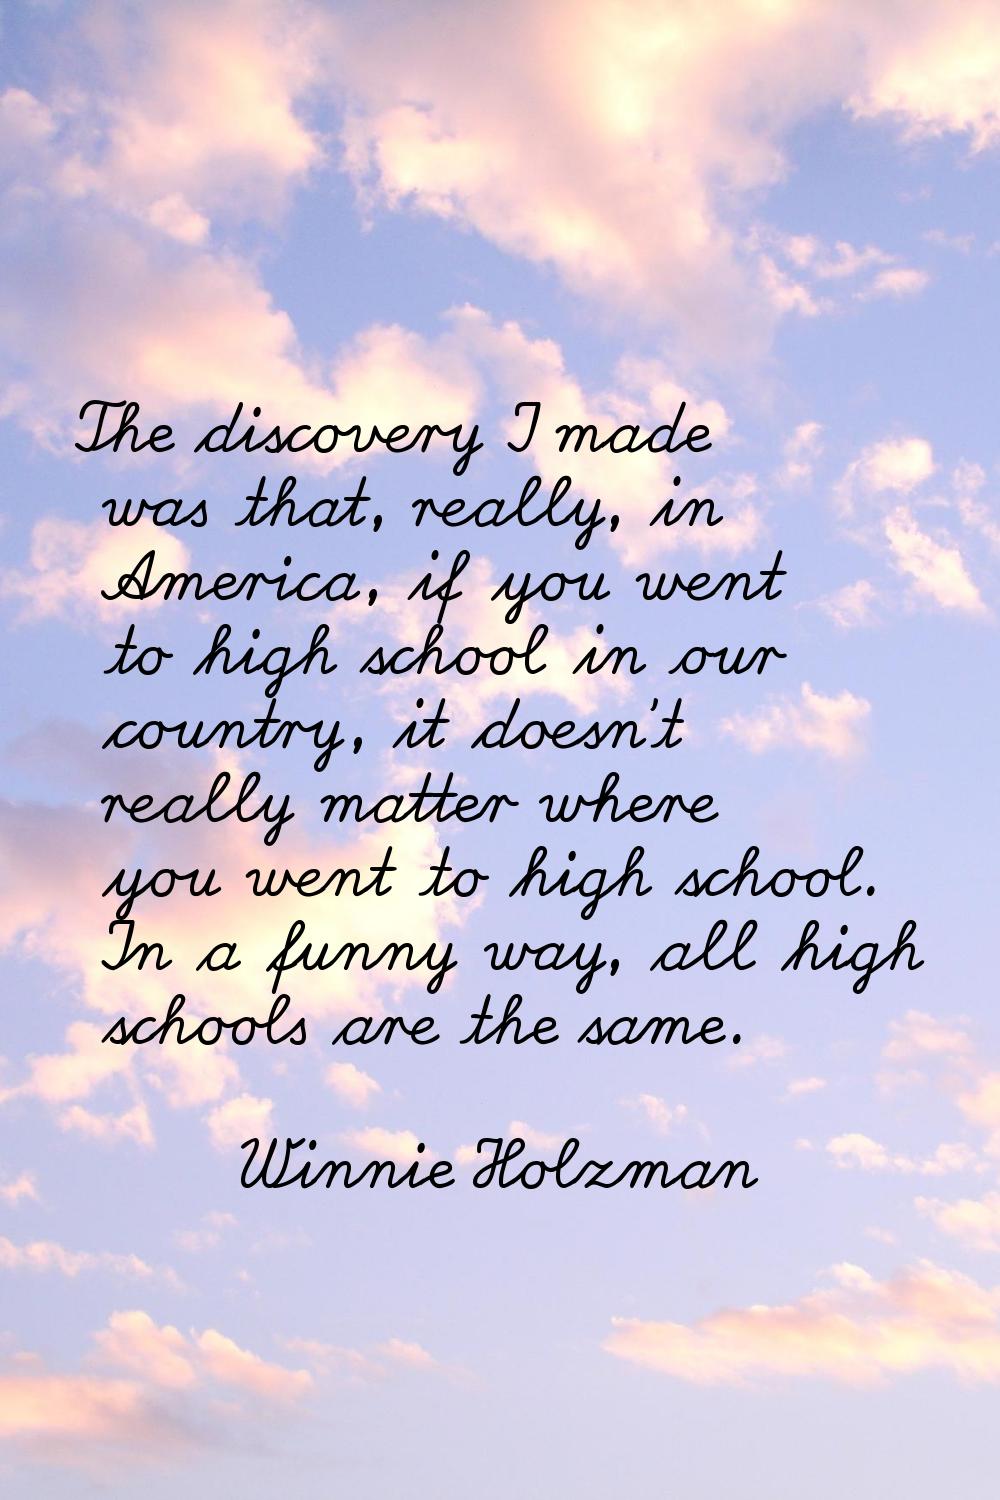 The discovery I made was that, really, in America, if you went to high school in our country, it do